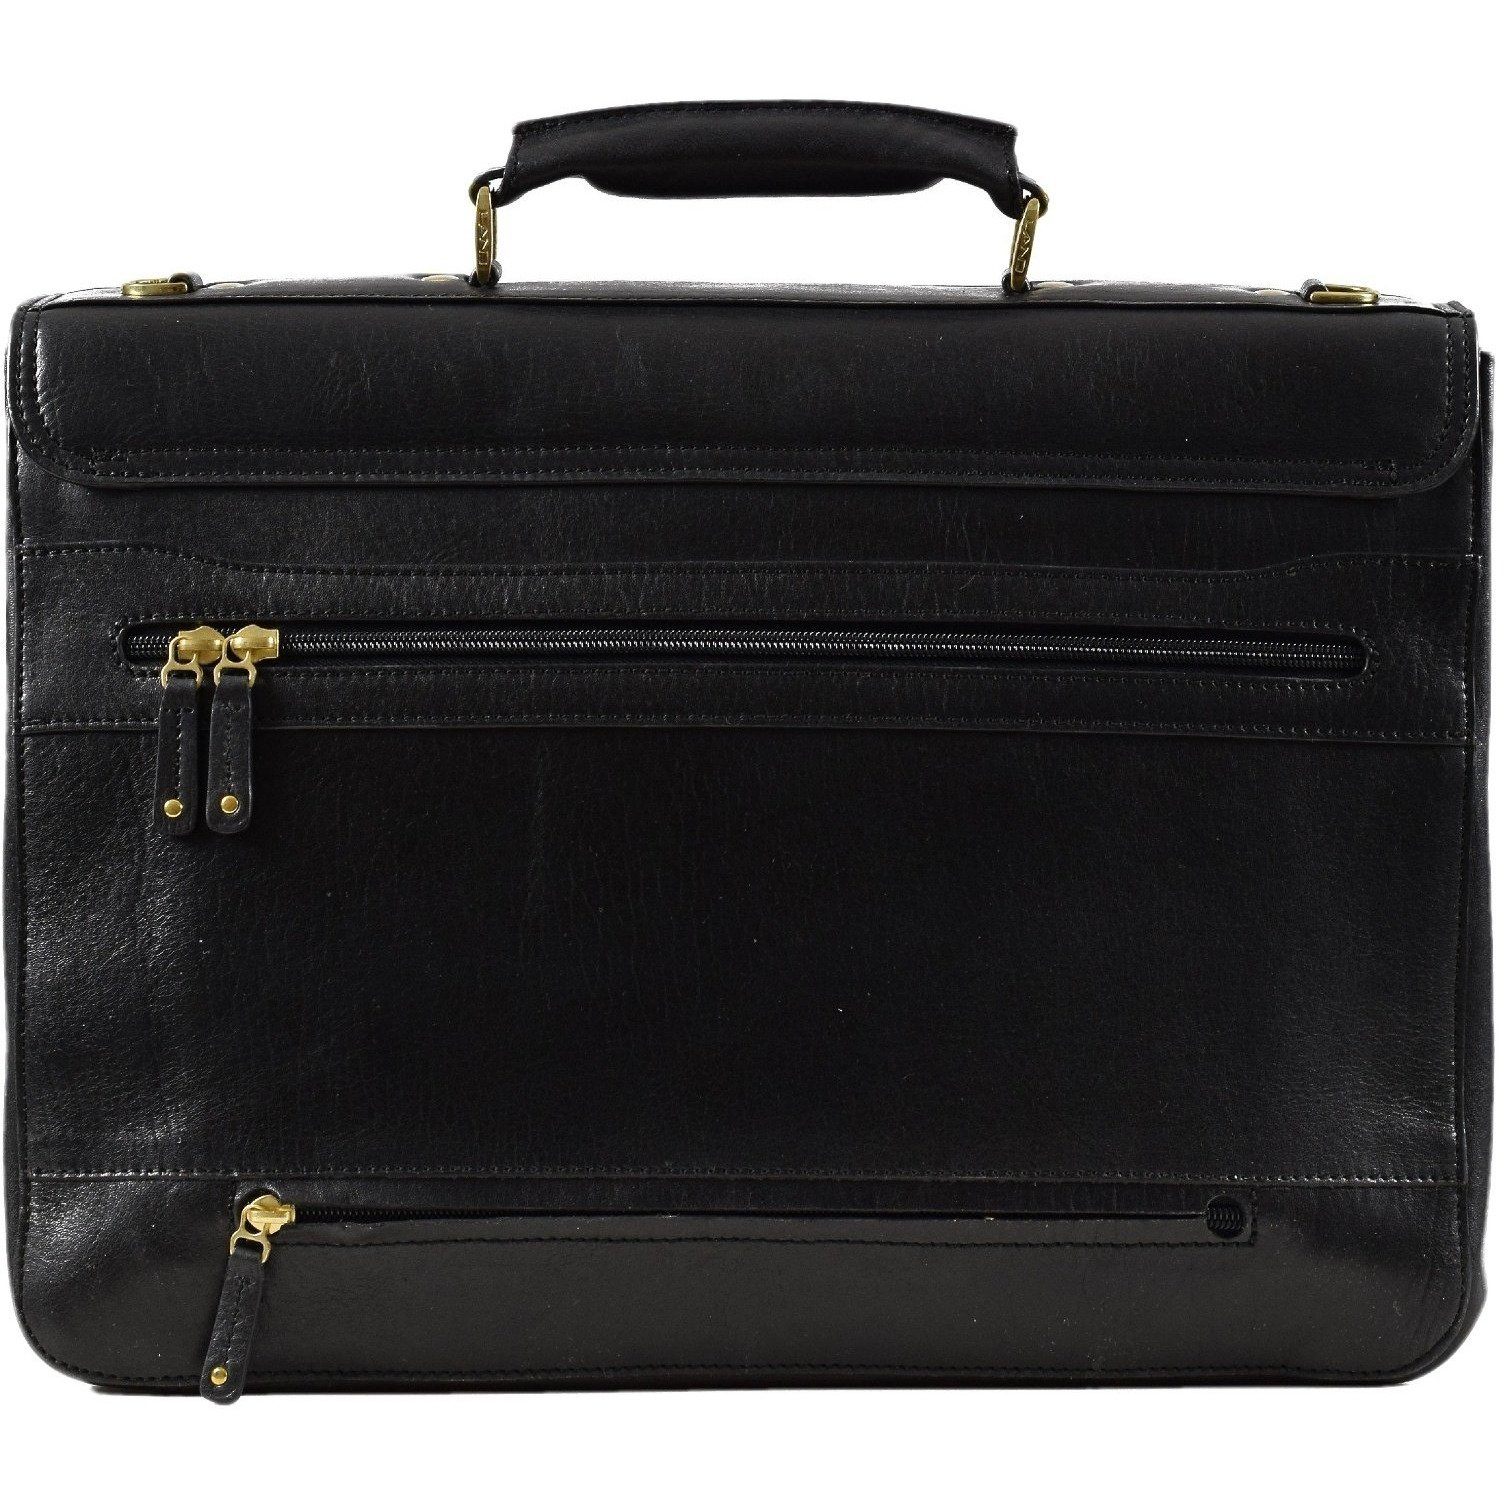 Limited Business Briefcase, Briefcase | LAND Leather